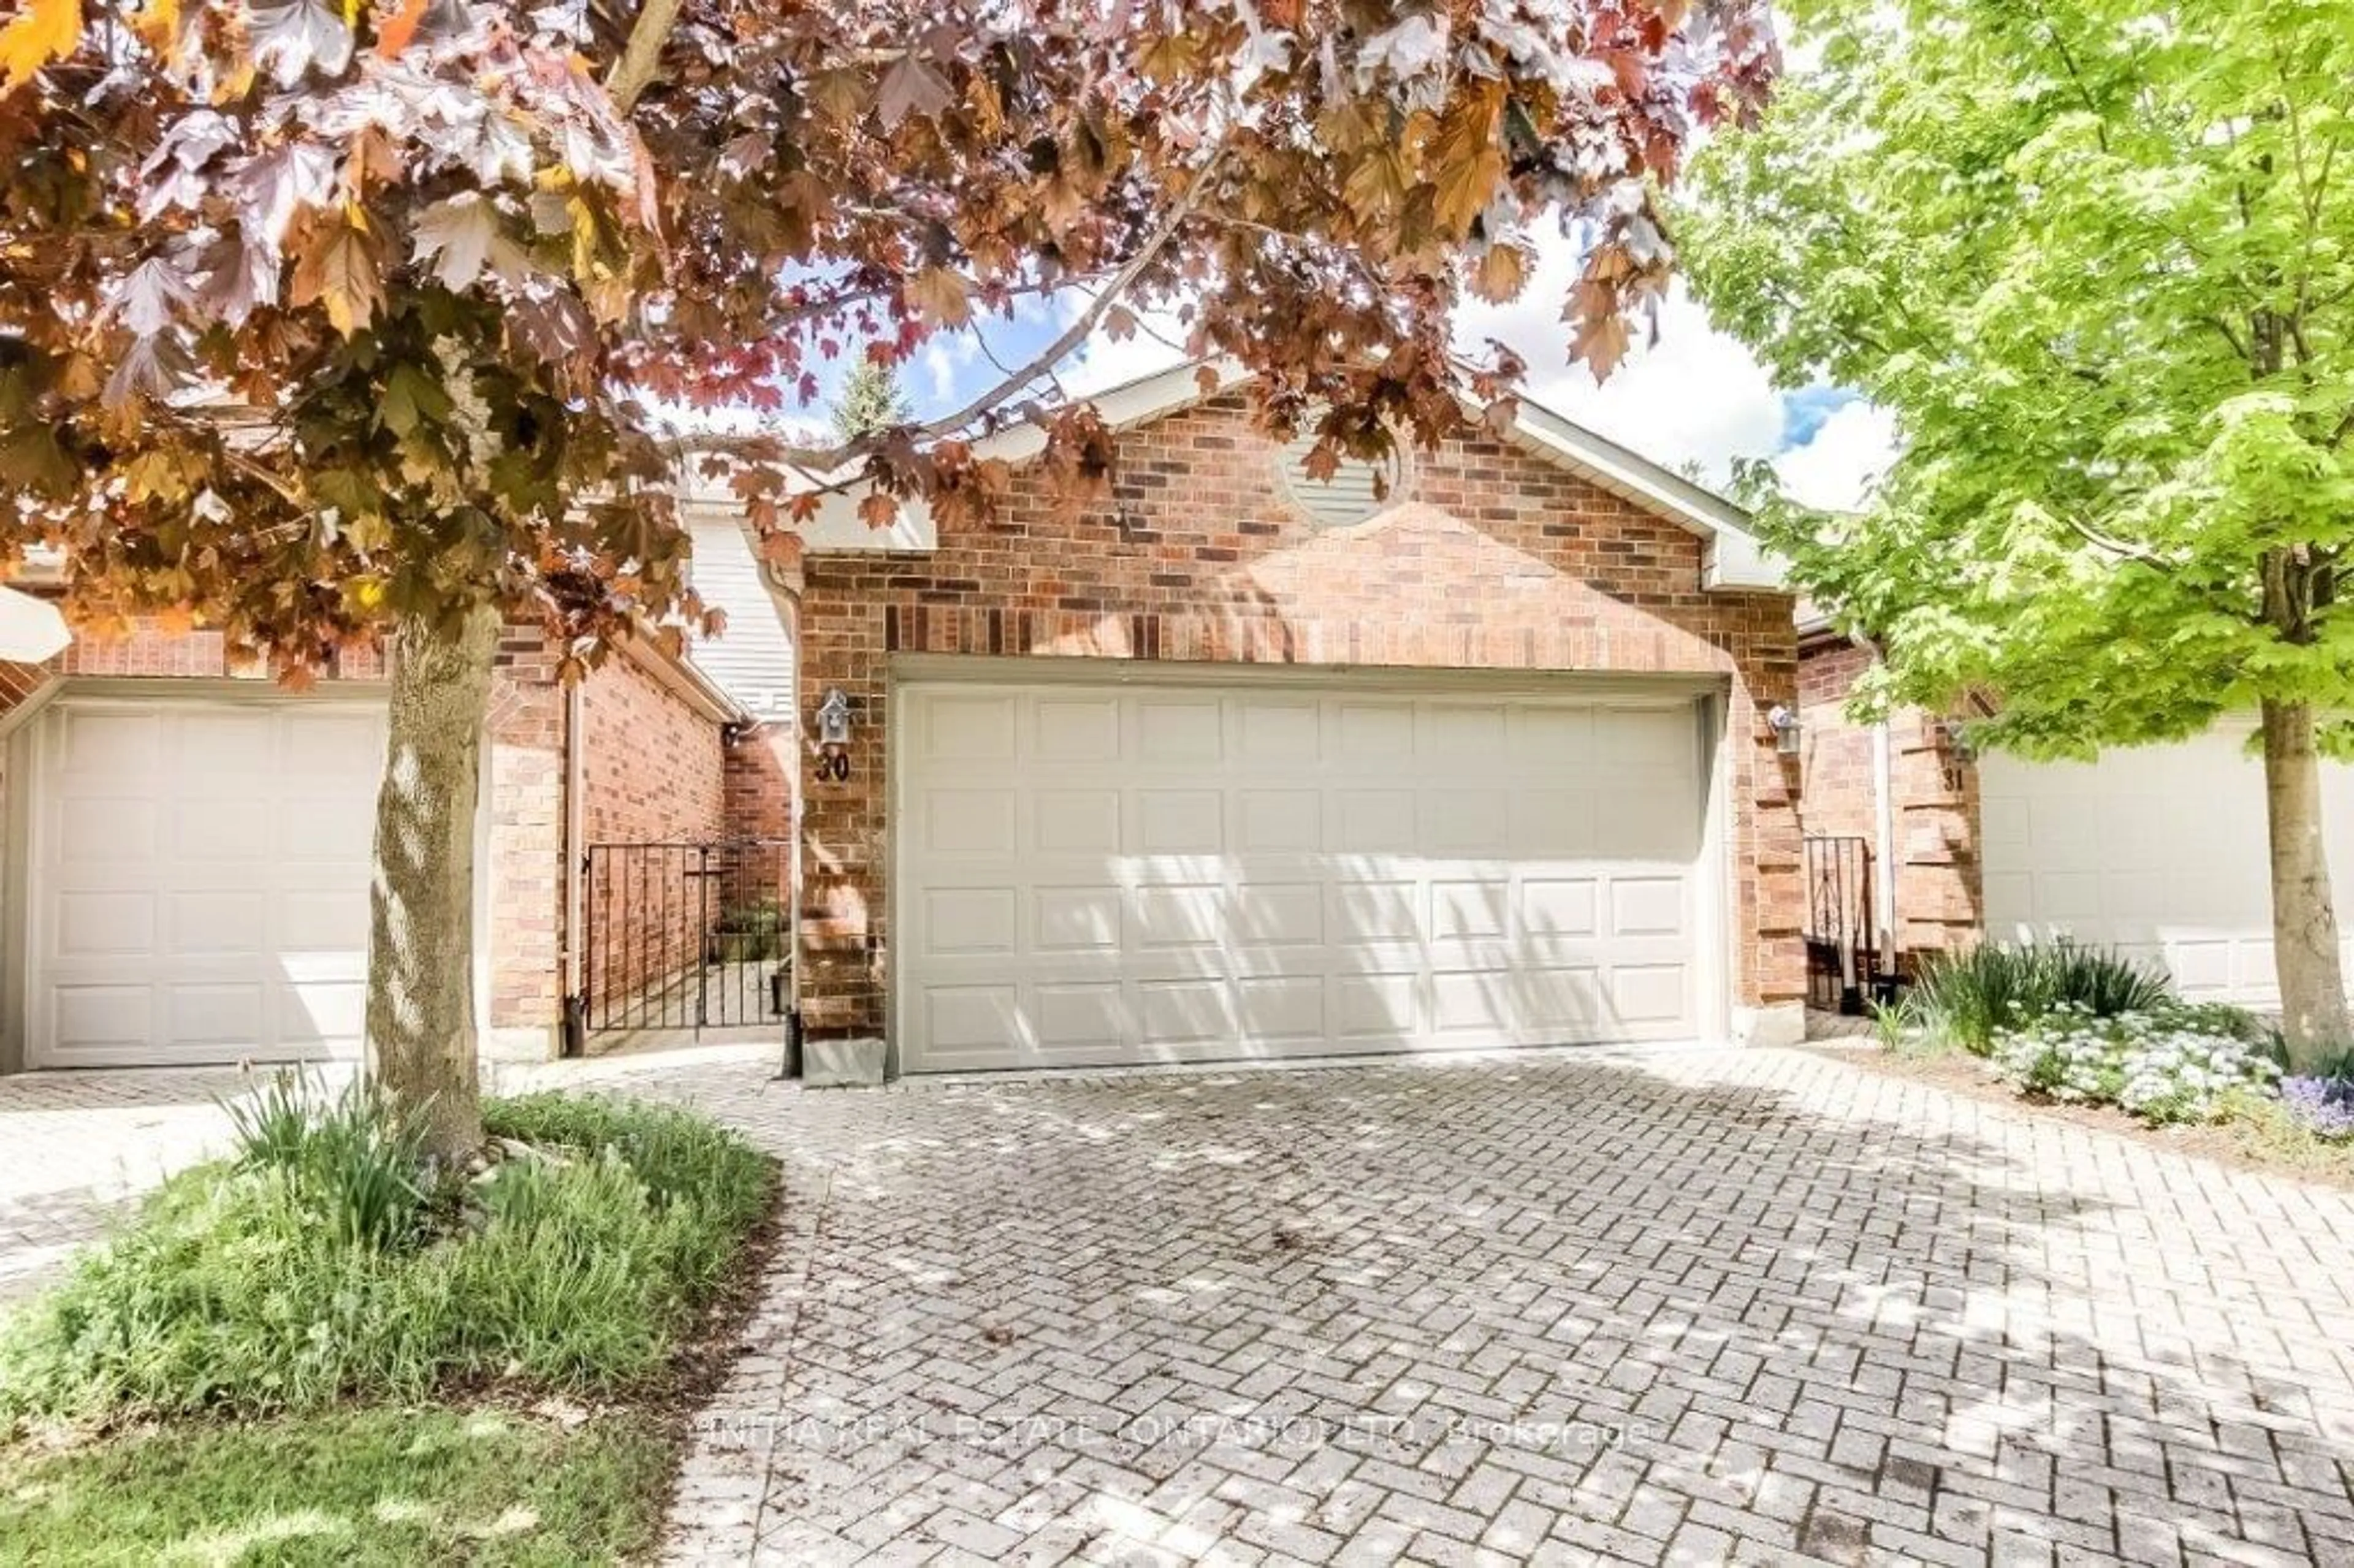 Home with brick exterior material for 70 Sunnyside Dr #30, London Ontario N5X 3W4